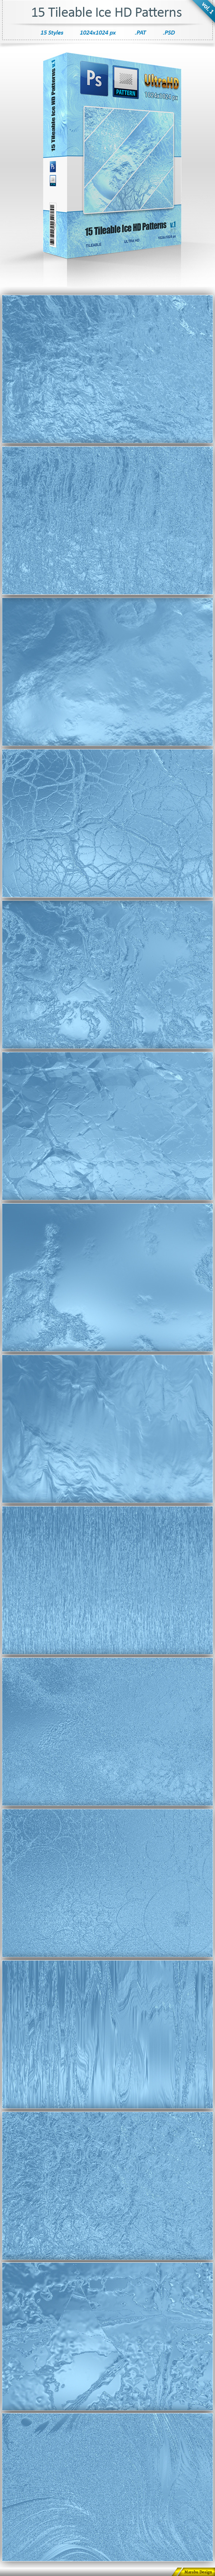 Ice Tileable Pattern Backgrounds (vol 1)